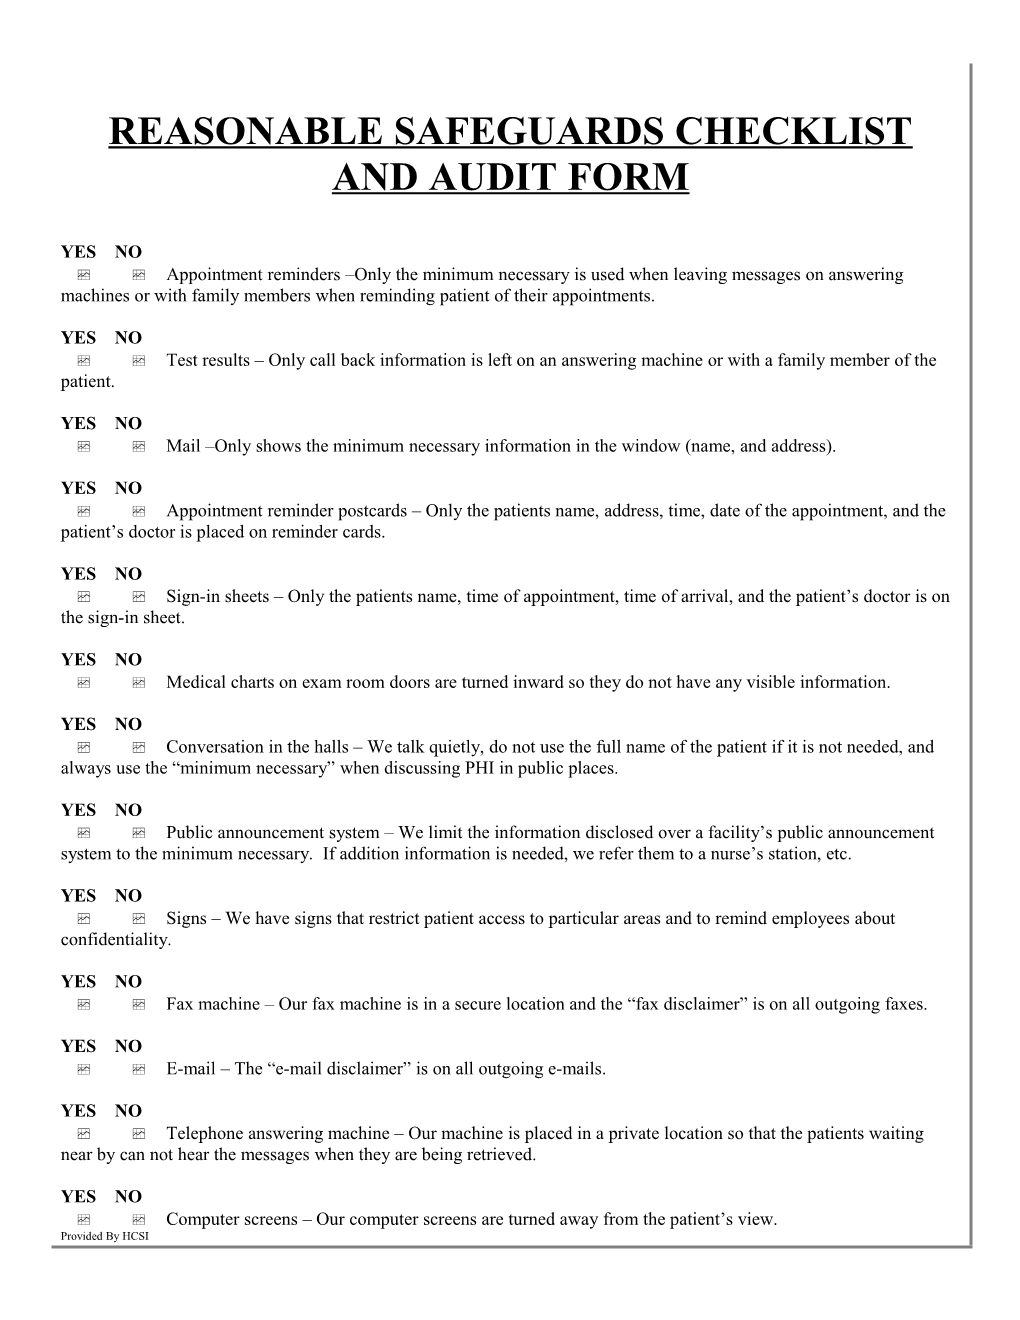 Reasonable Safeguards Checklist and Audit Form